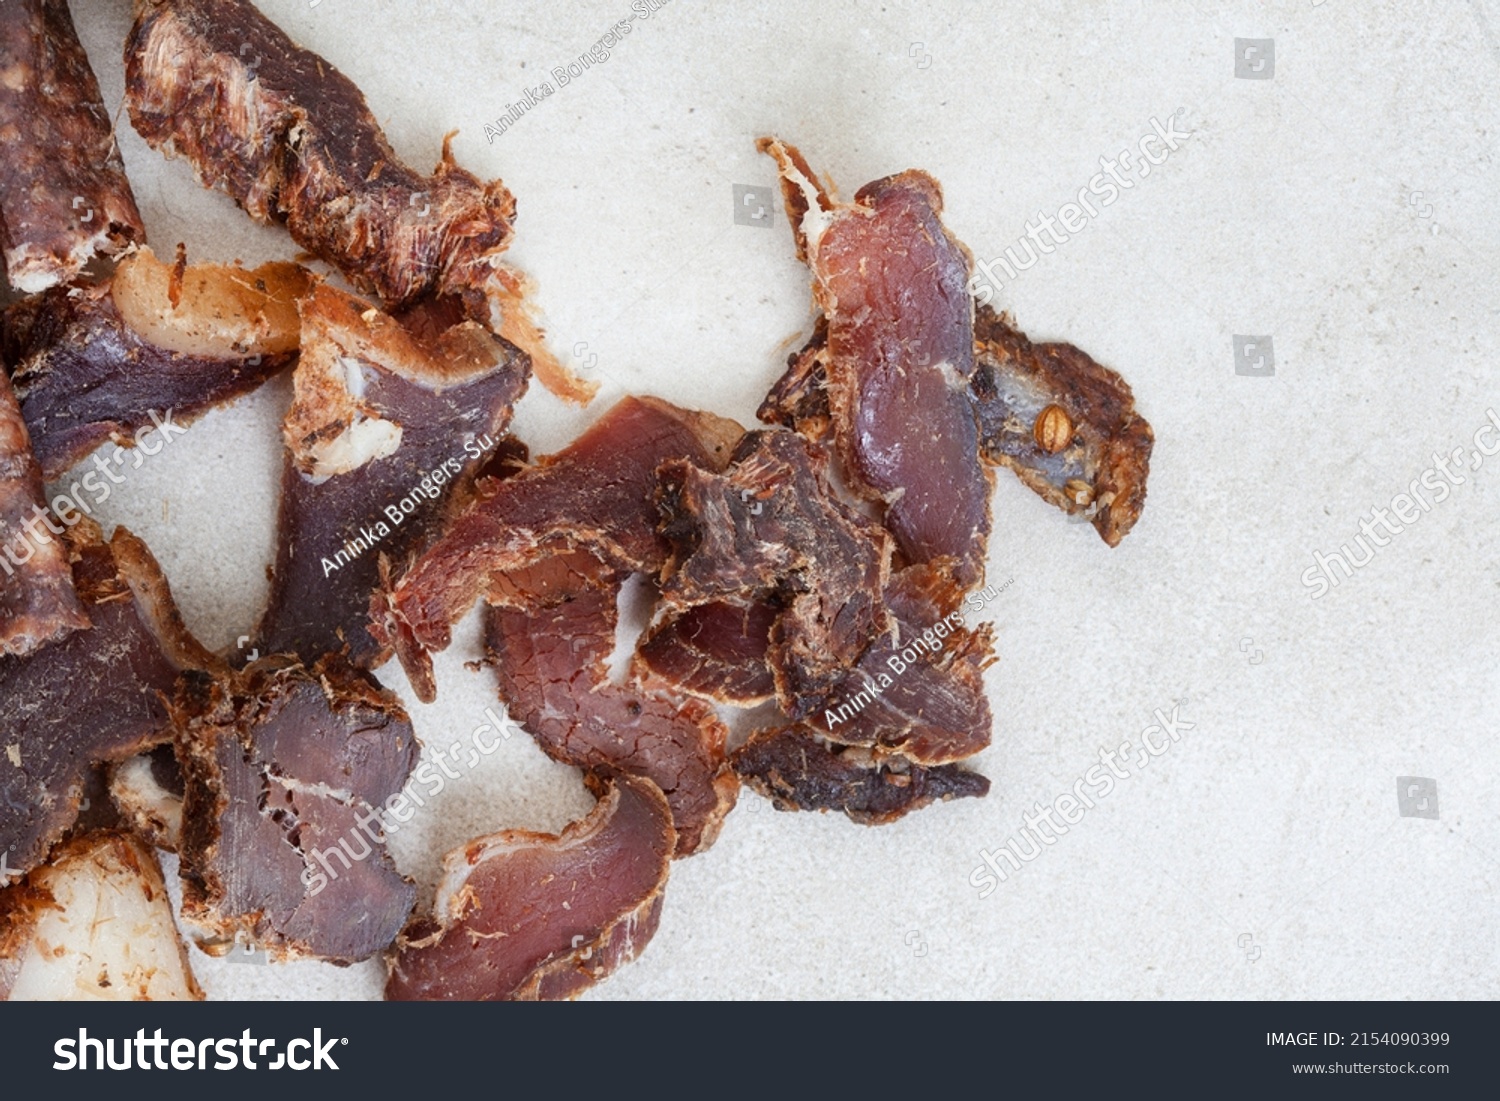 South African Biltong Dried Cured Meat Stock Photo Shutterstock